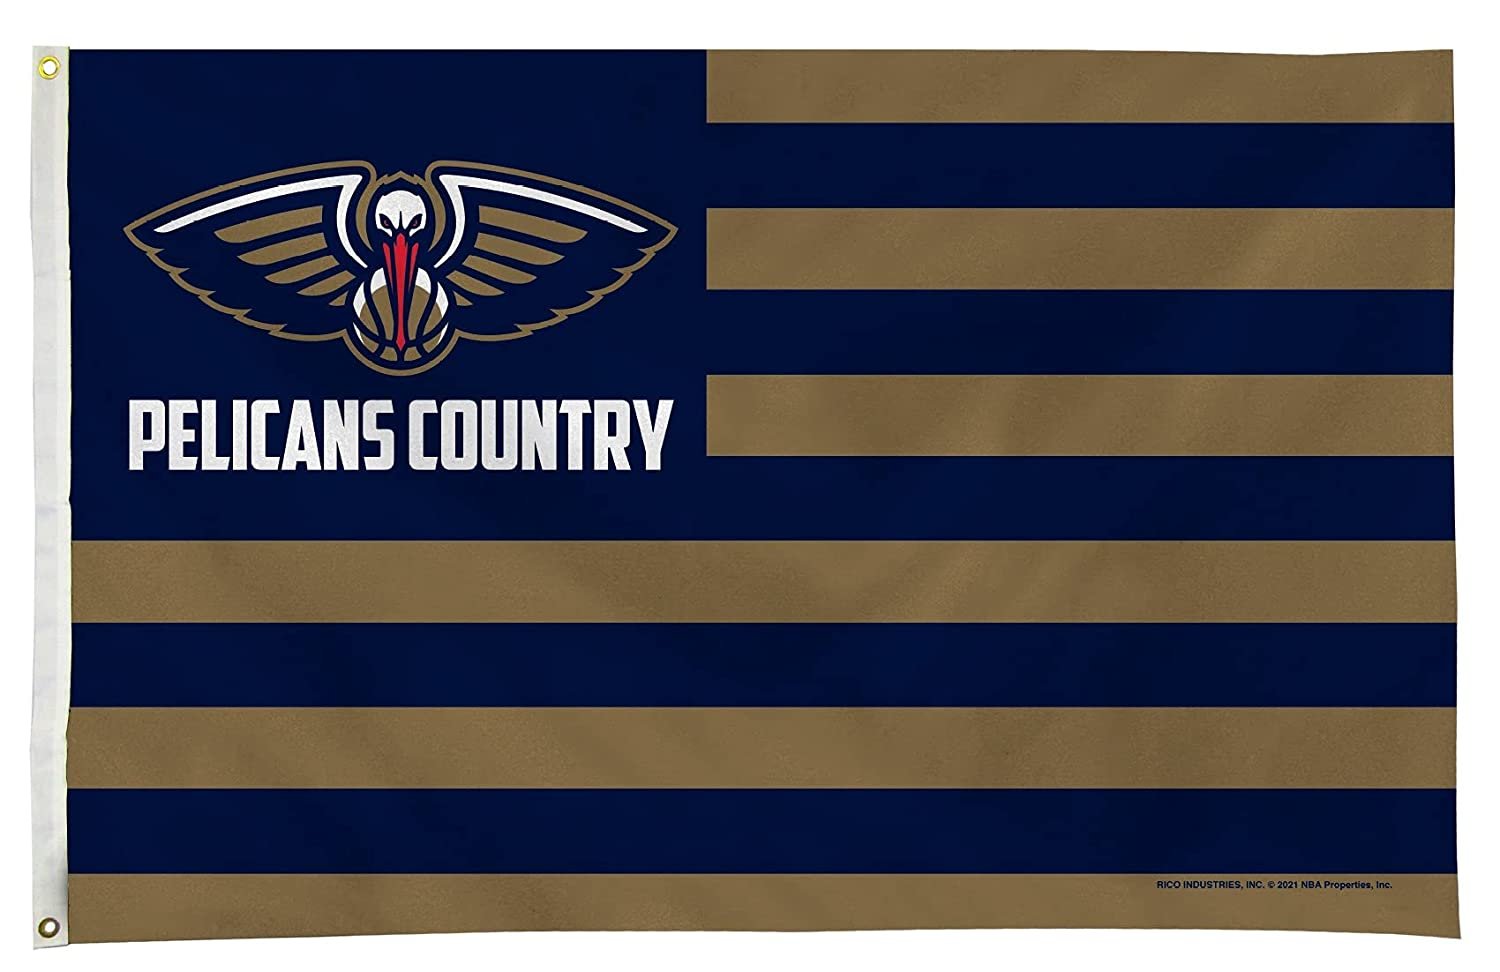 New Orleans Pelicans Flag Banner 3x5 Country Design Premium with Metal Grommets Outdoor House Basketball